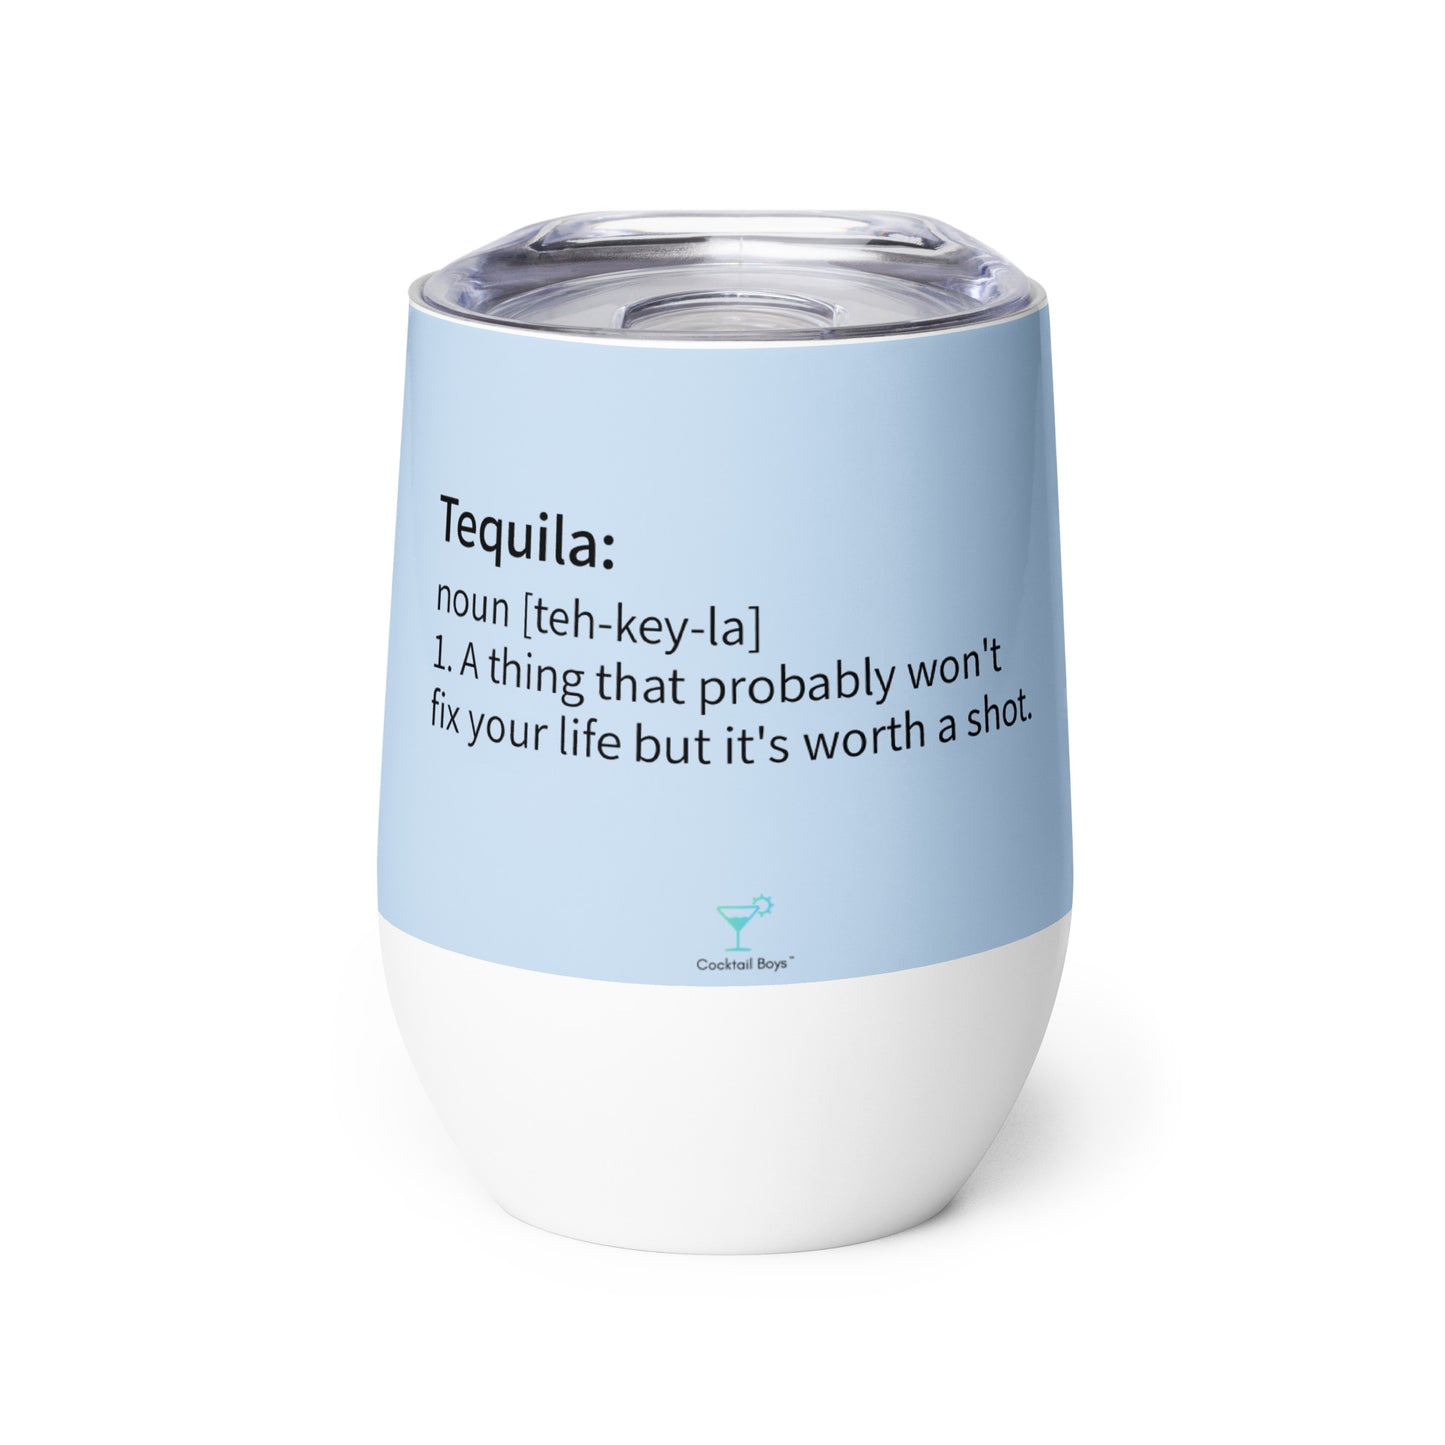 Tequila Dictionary Definition Wine tumbler